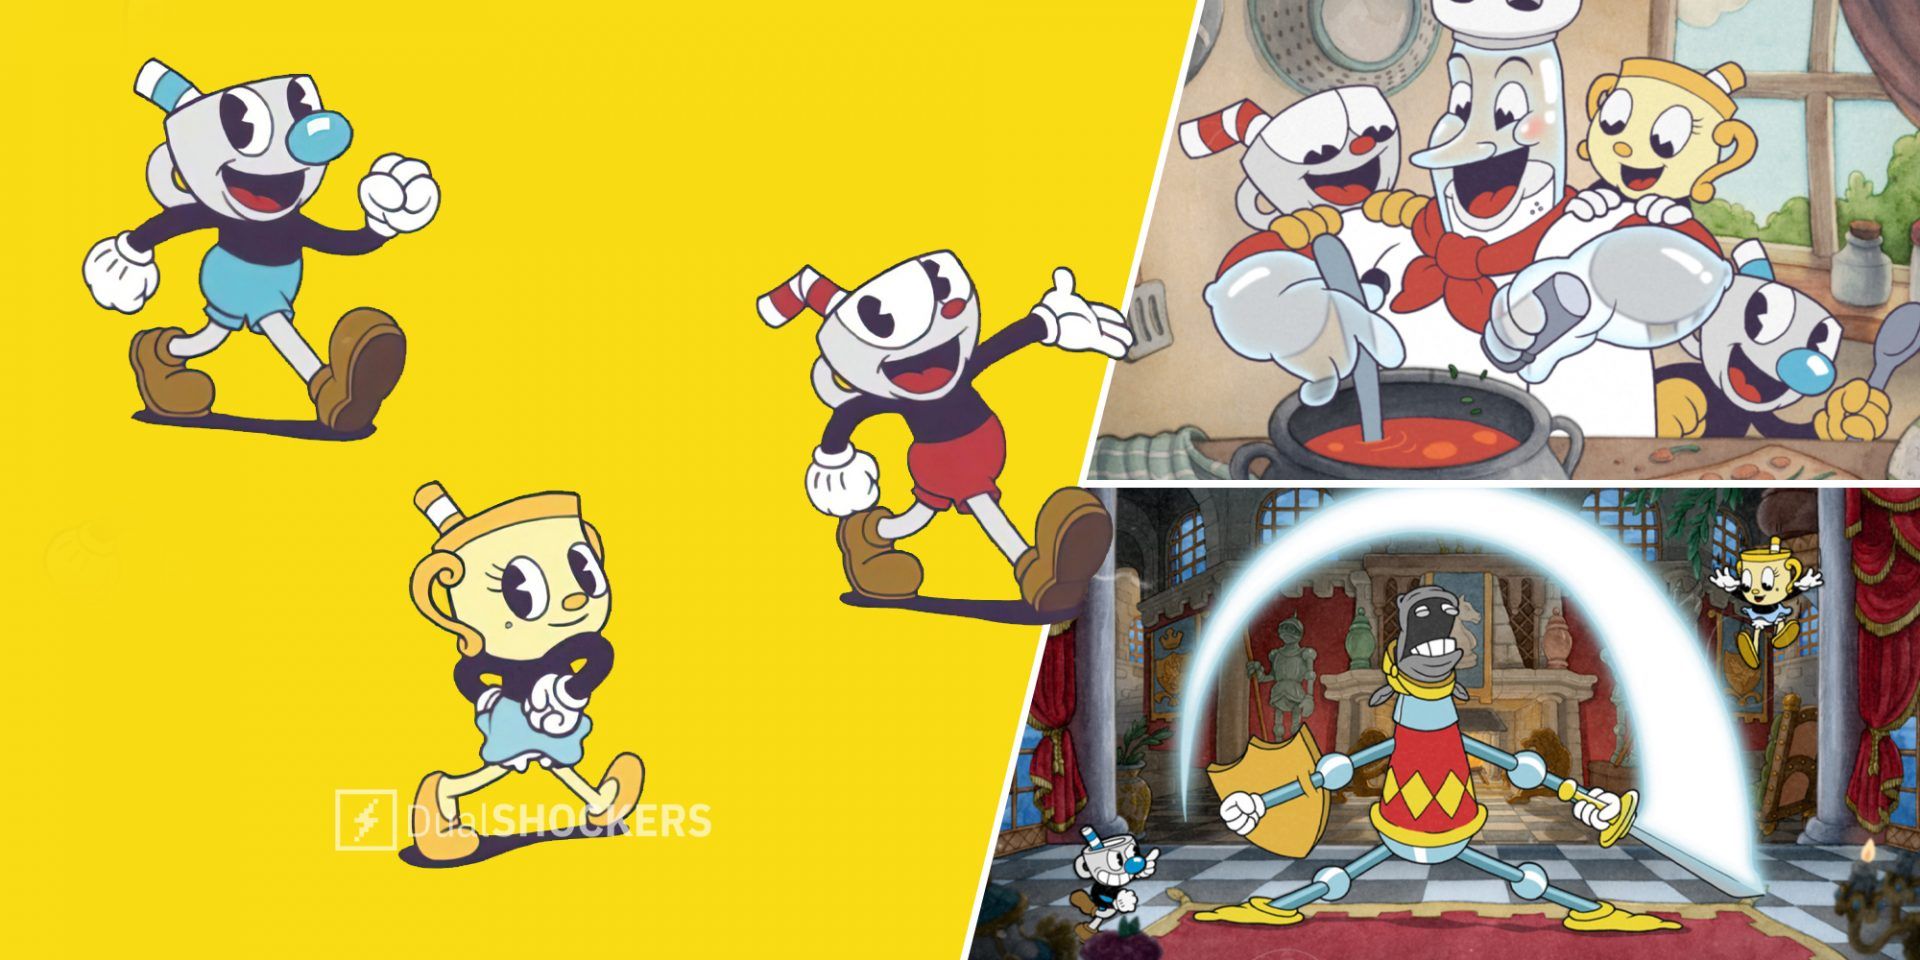 Cuphead characters Mugman, Miss Chalice, and Cuphead on left, Cuphead The Delicious Last Course chef with characters on top right, The Delicious Last Course level boss on bottom right